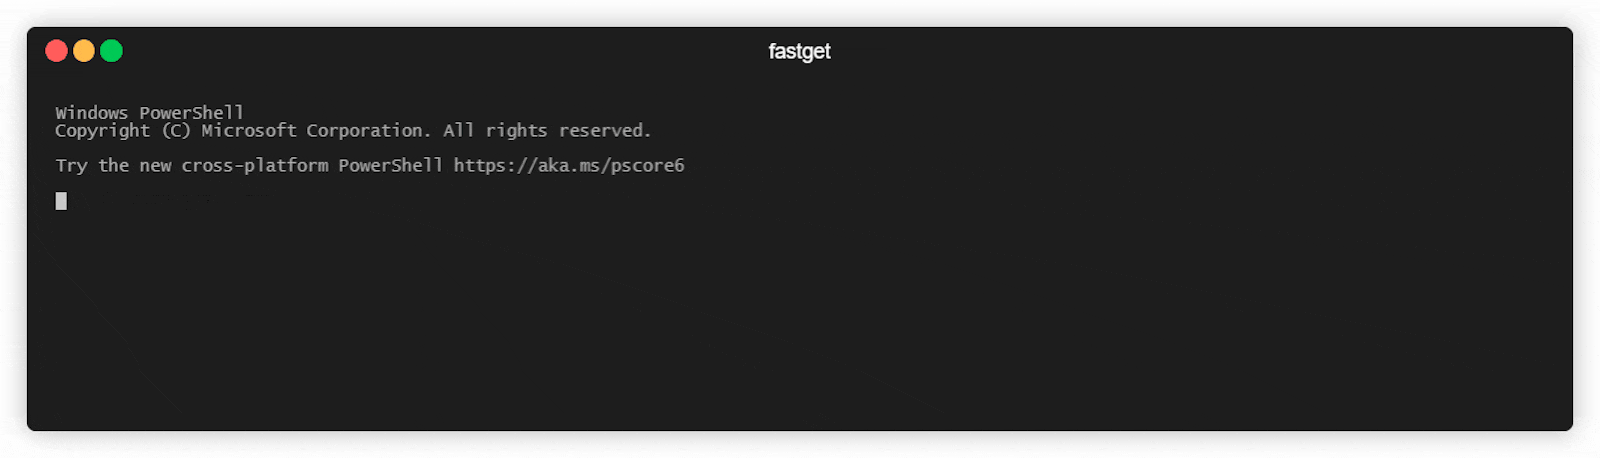 fastget - ultra fast download files over HTTP(S)